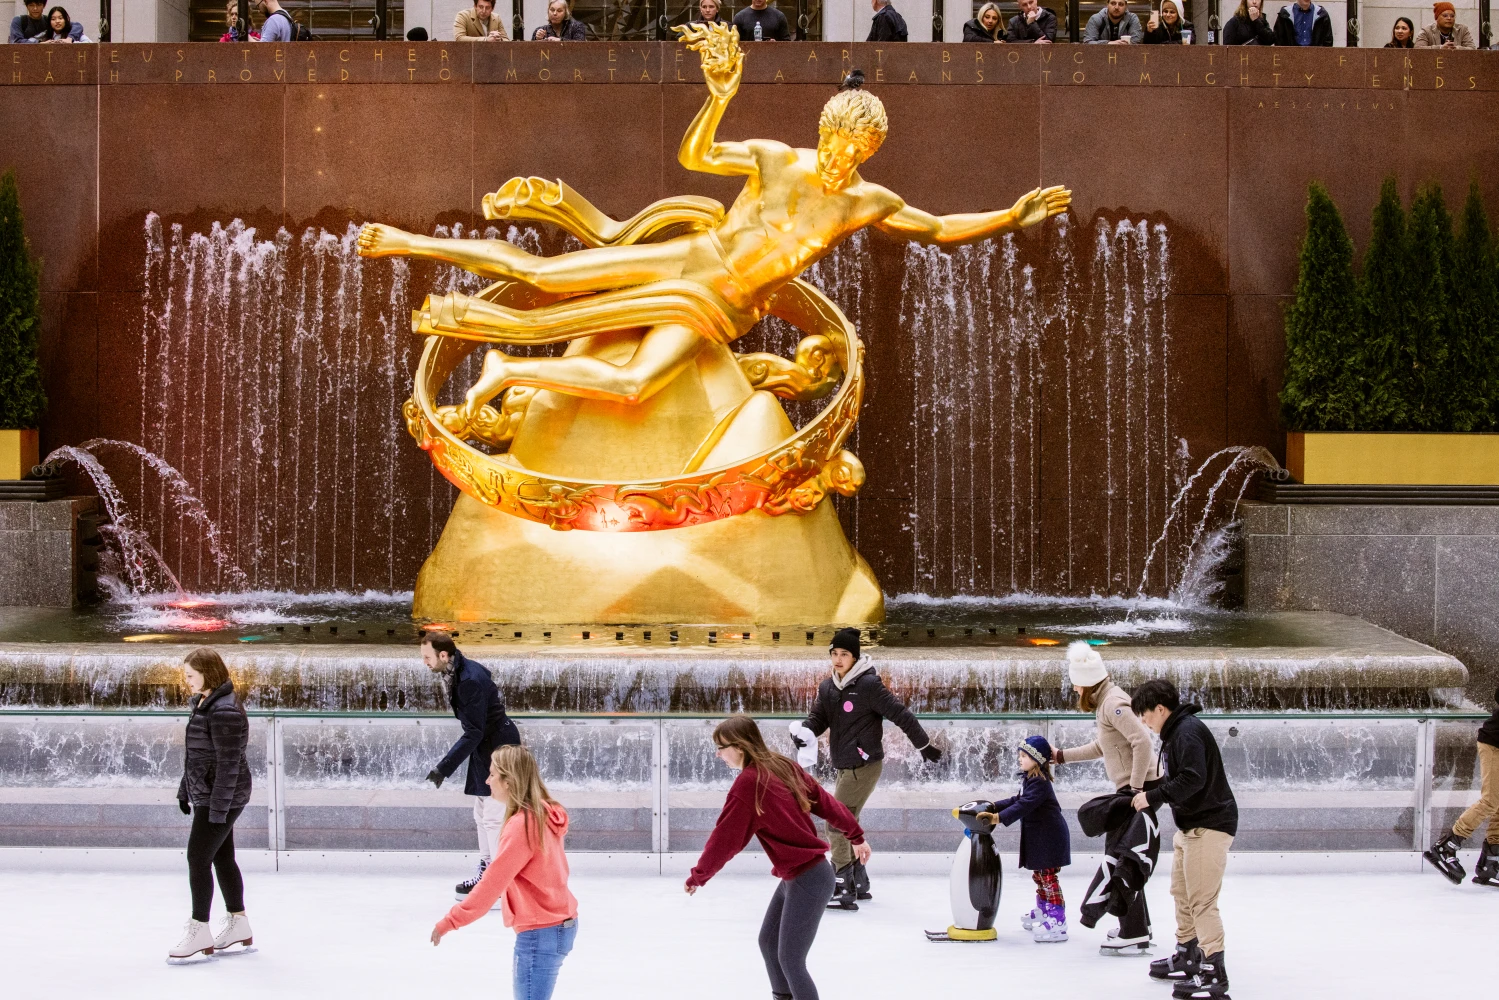 The Rink at Rockefeller Plaza: What to expect - 2